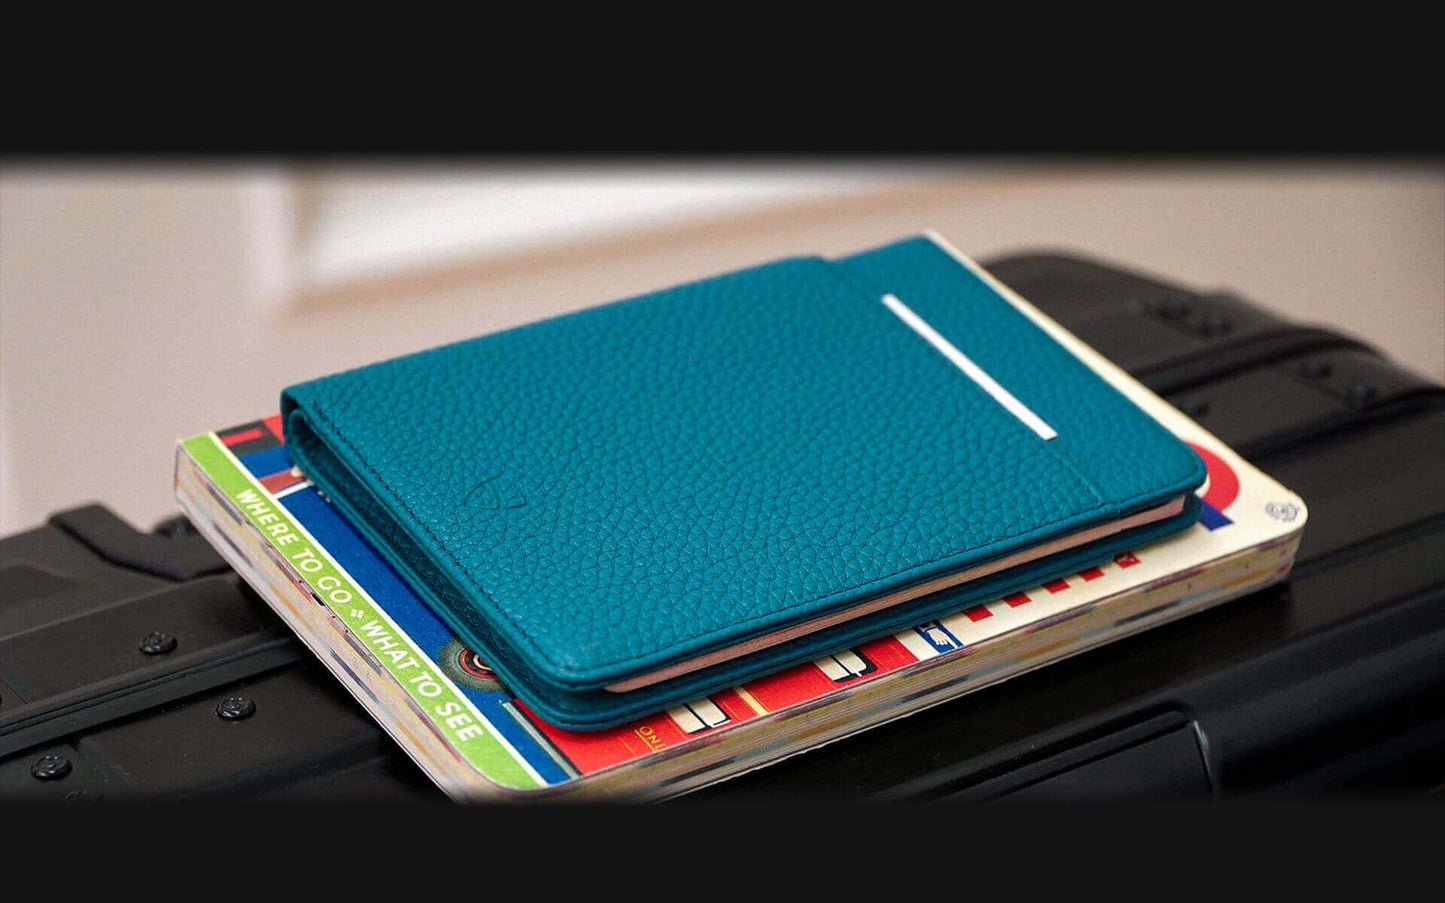 Travel wallet with multi-slot organization